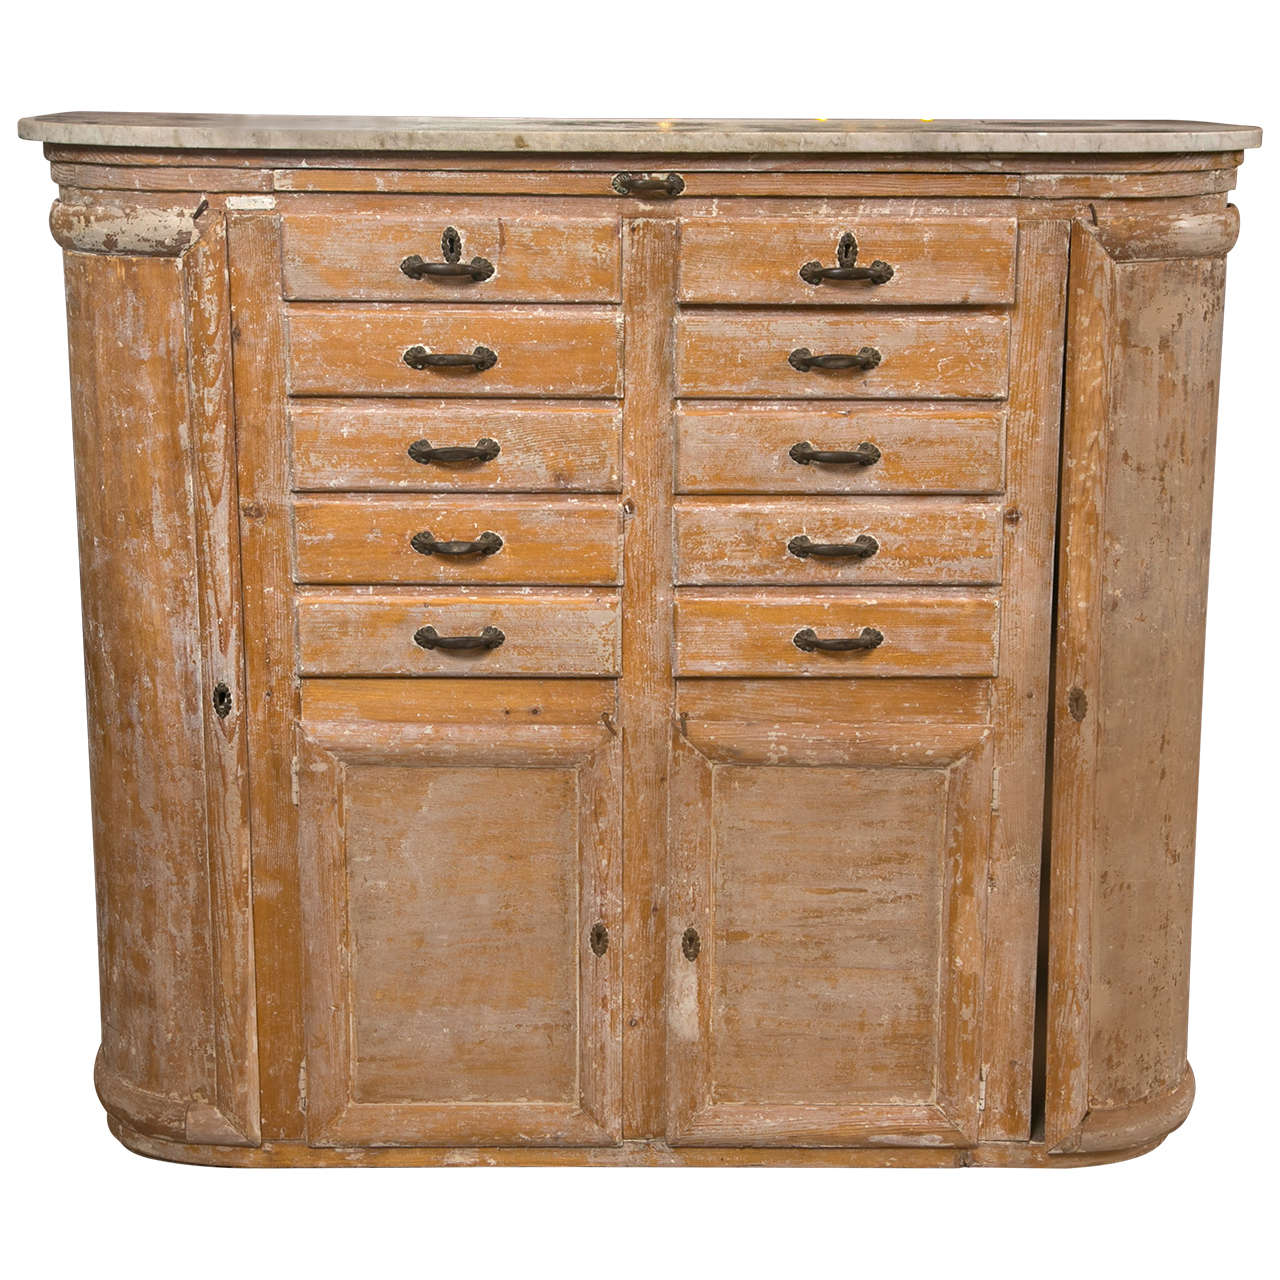 Marble-Top Rounded Corner Cabinet